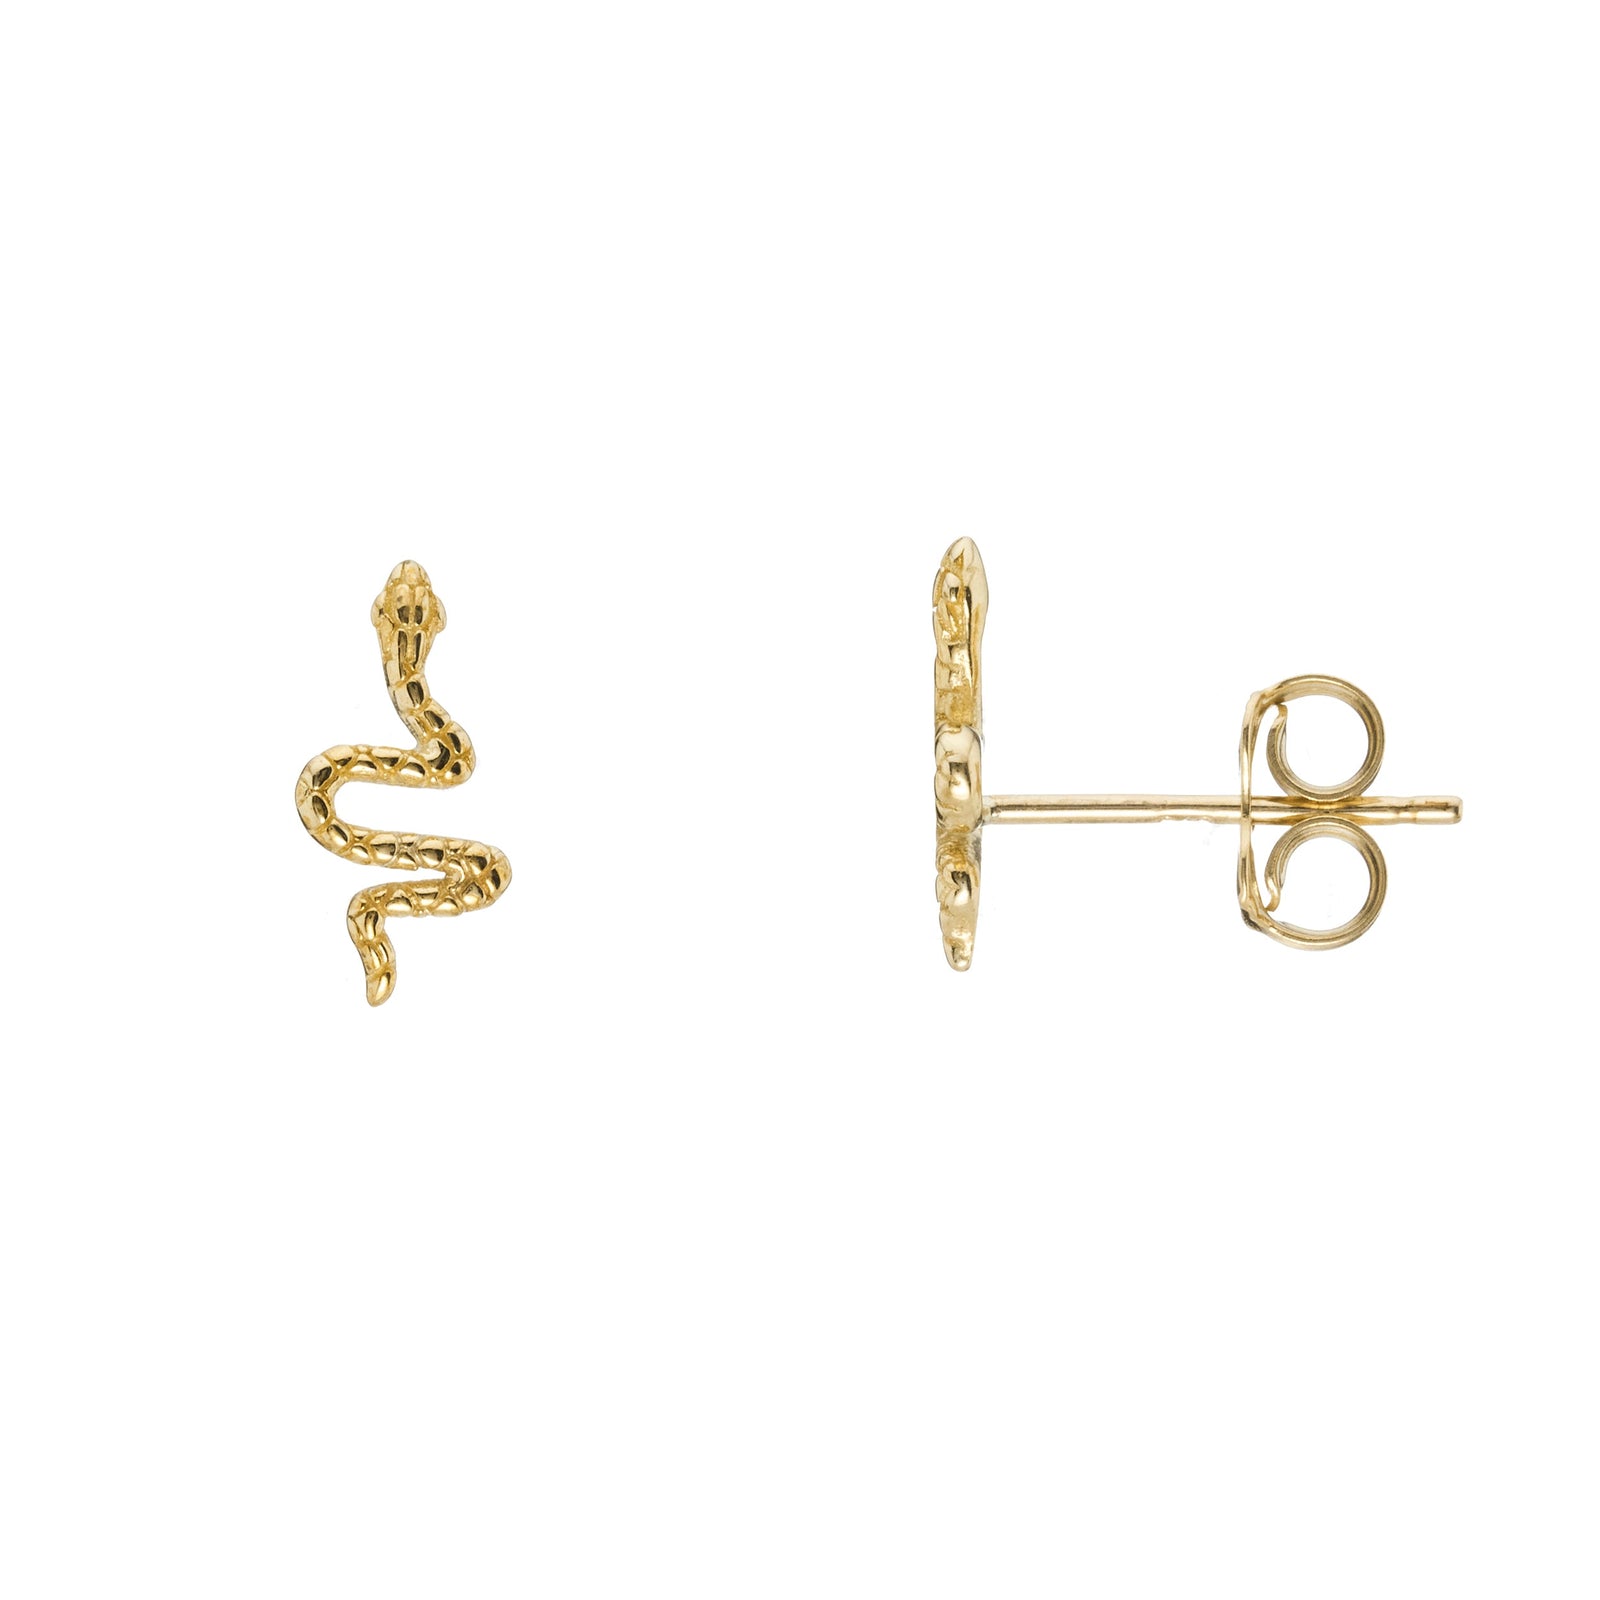 9ct gold small snake stud earrings